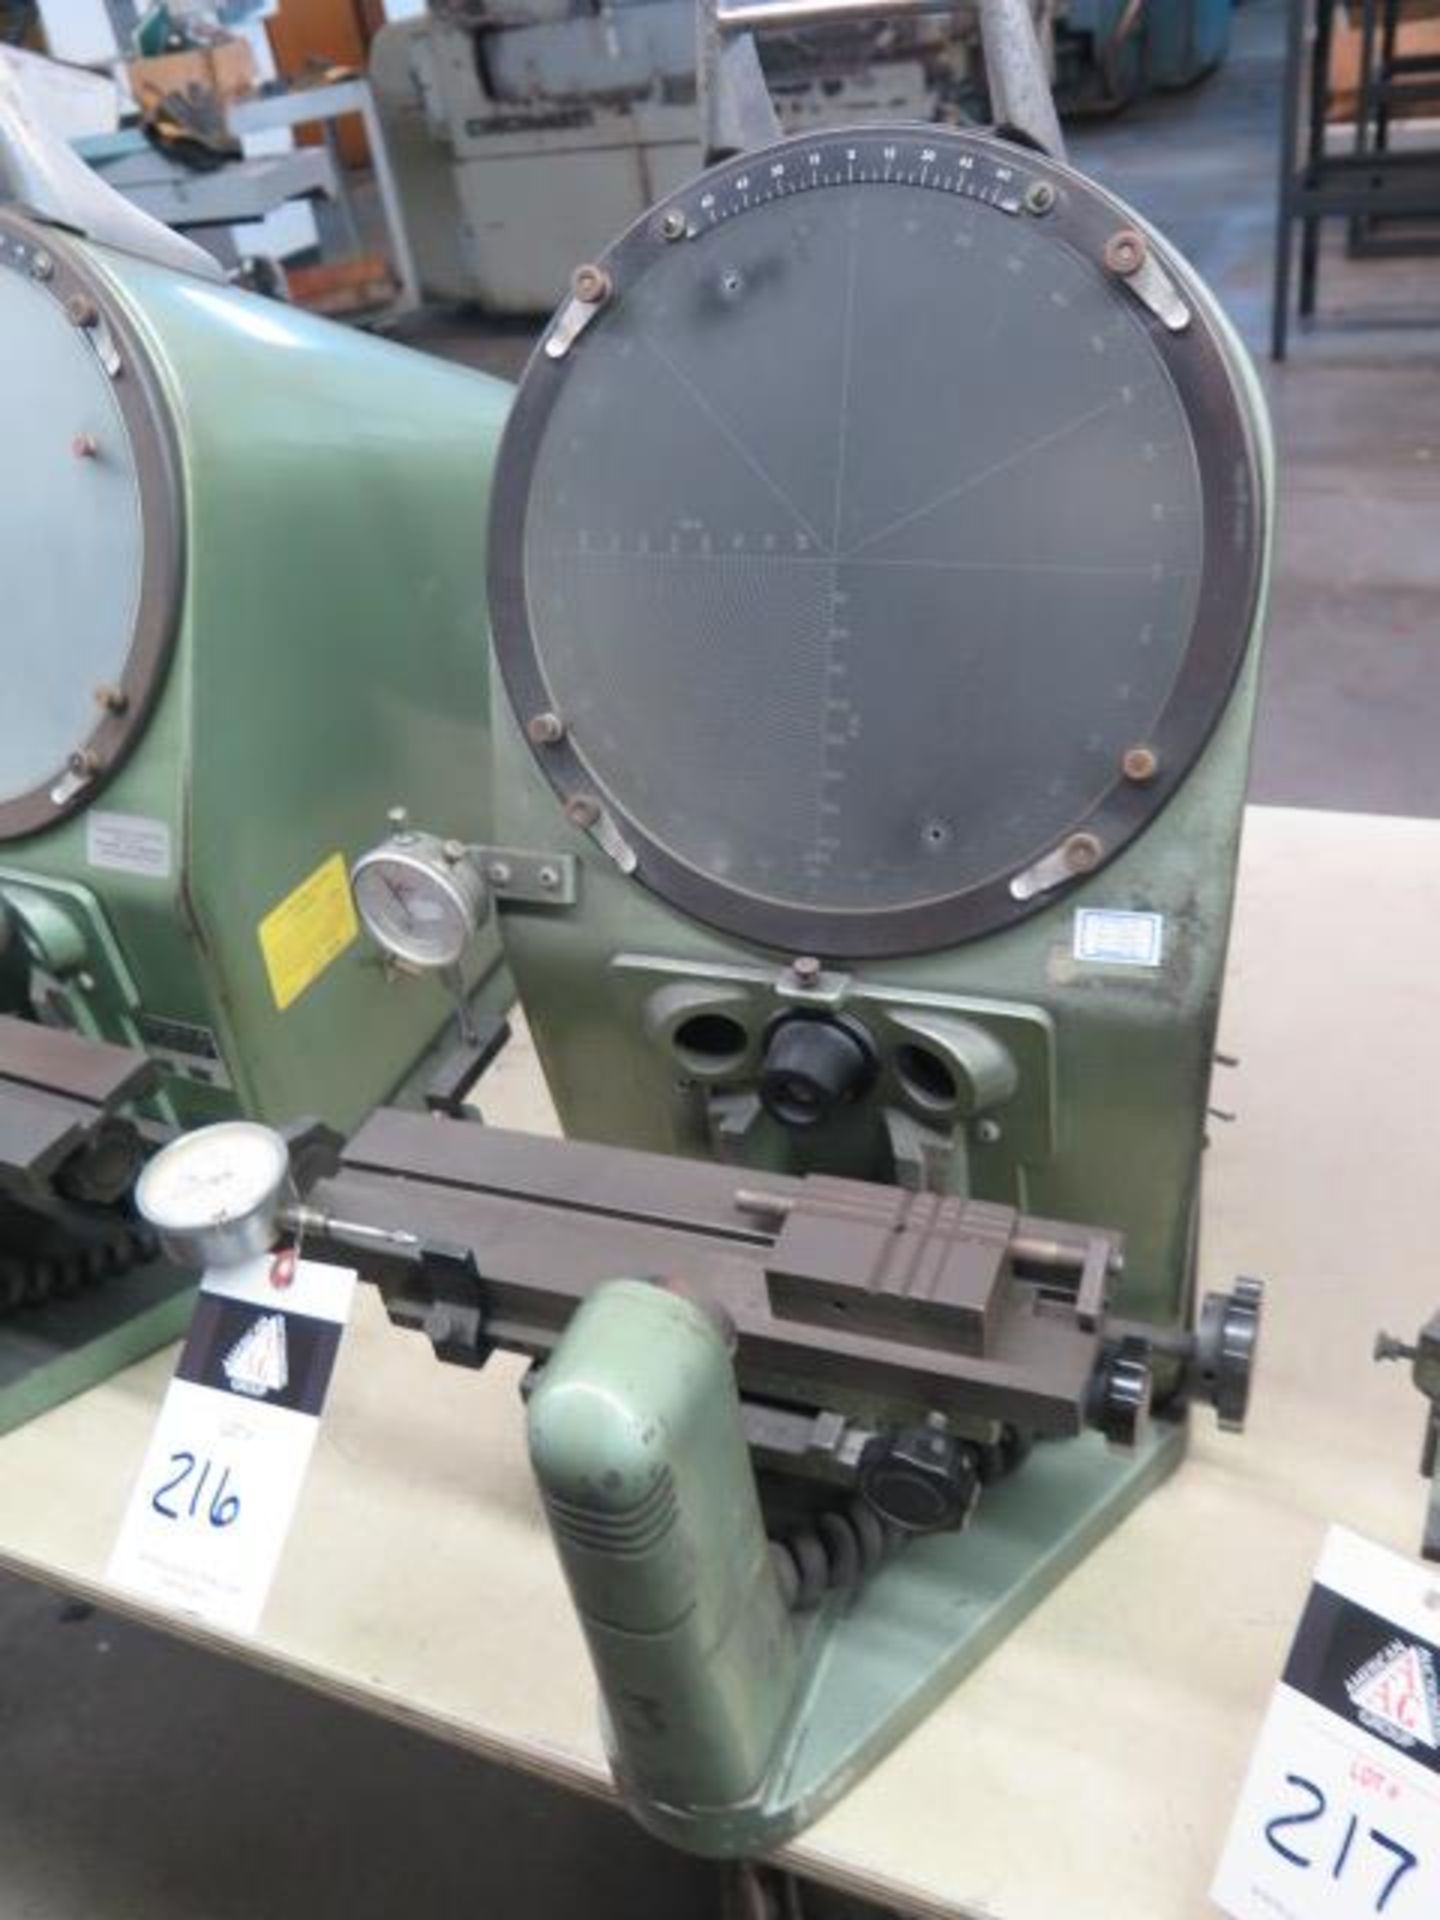 Pacific Gage Optical Comparator w/ Dial Indicator Readouts (SOLD AS-IS - NO WARRANTY) - Image 9 of 9